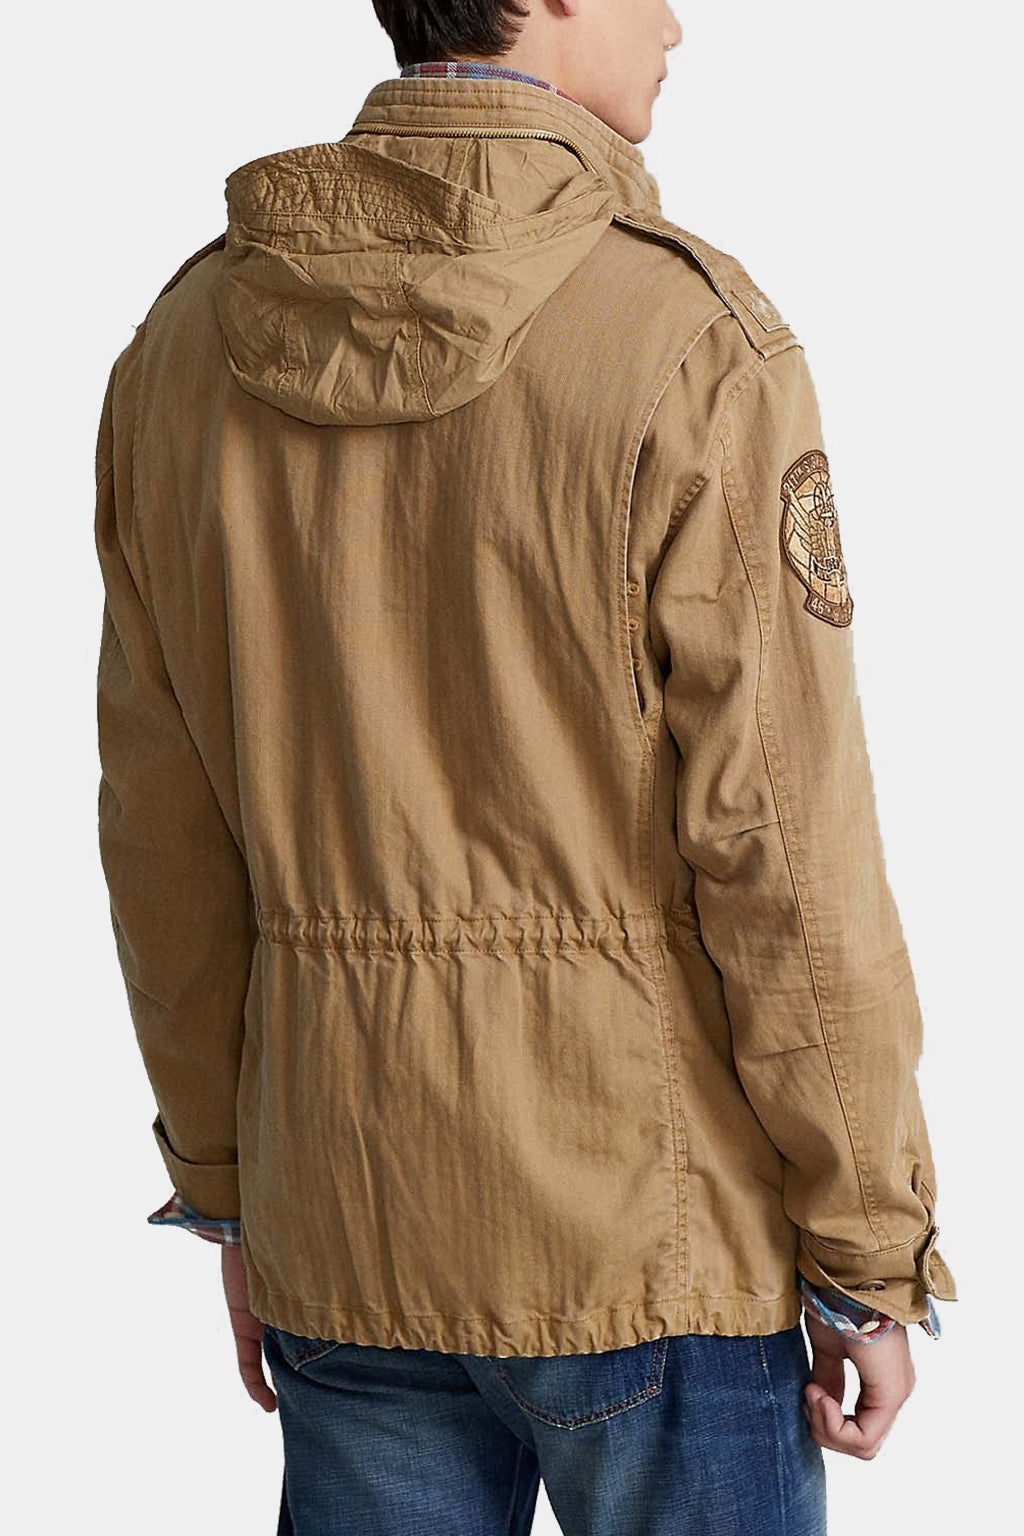 Polo Ralph Lauren - Parka with Crest and Pocket Detail